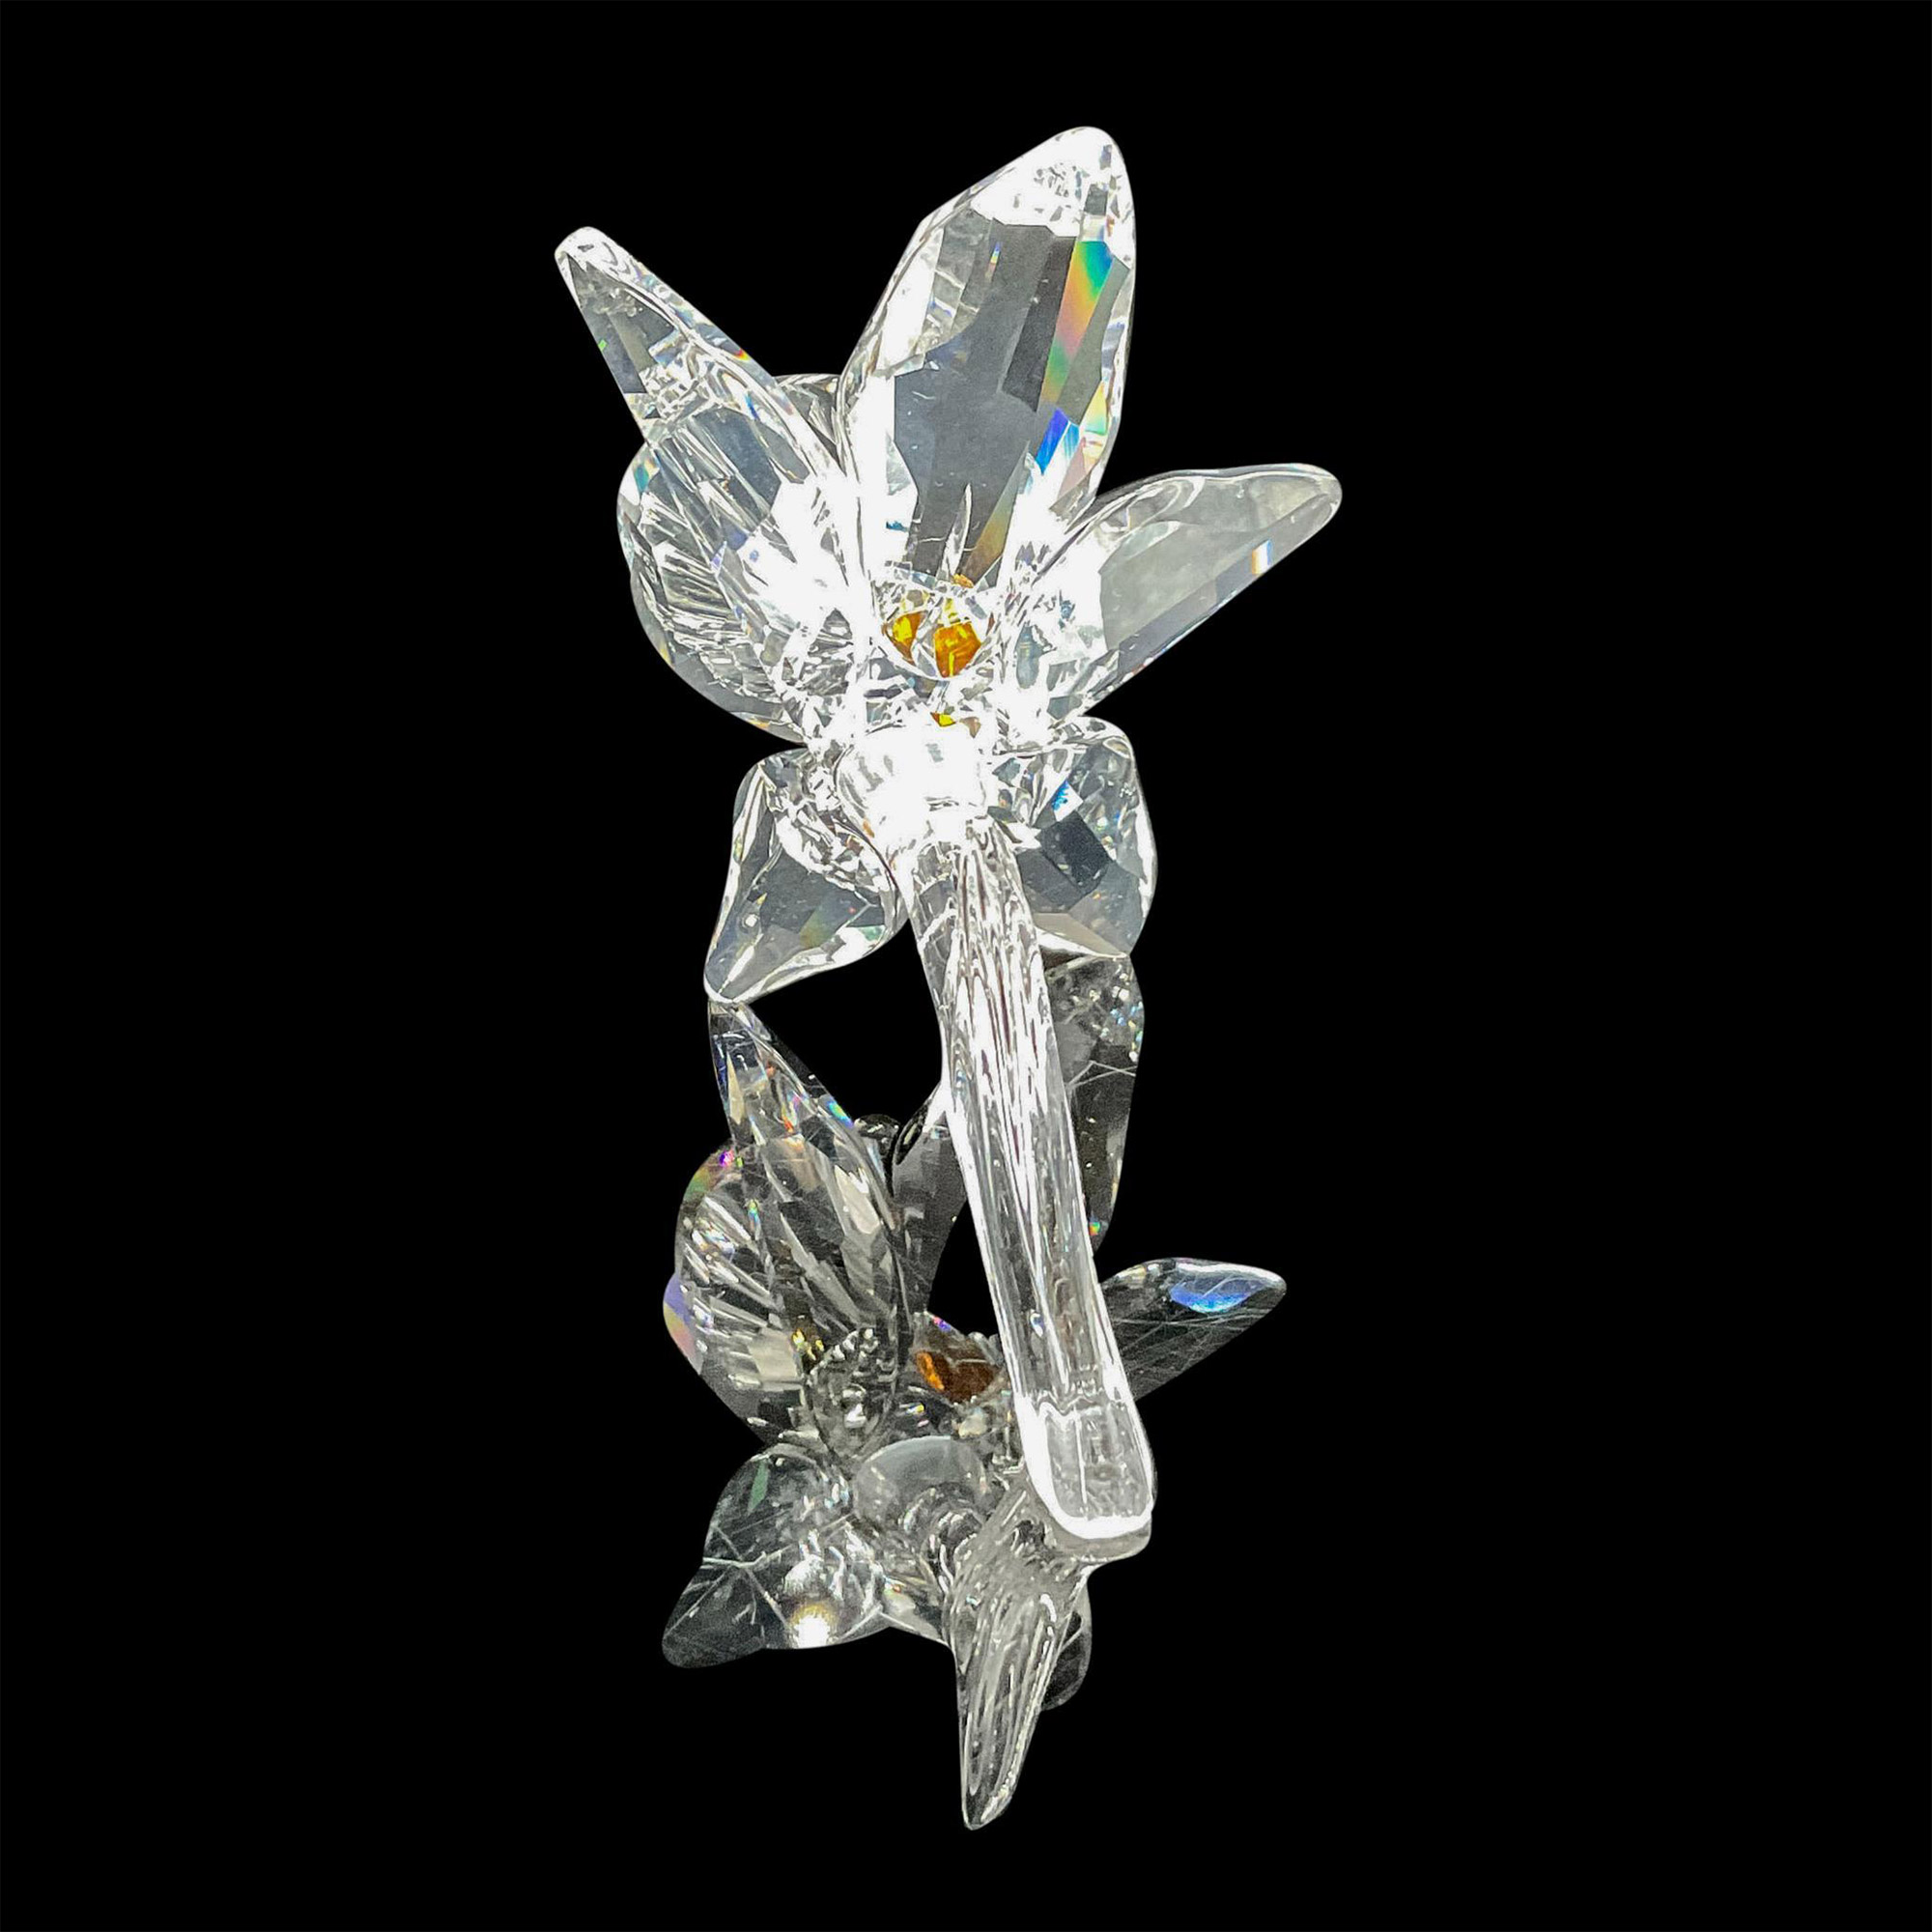 Swarovski Silver Crystal Figurine, The Yellow Orchid - Image 3 of 4